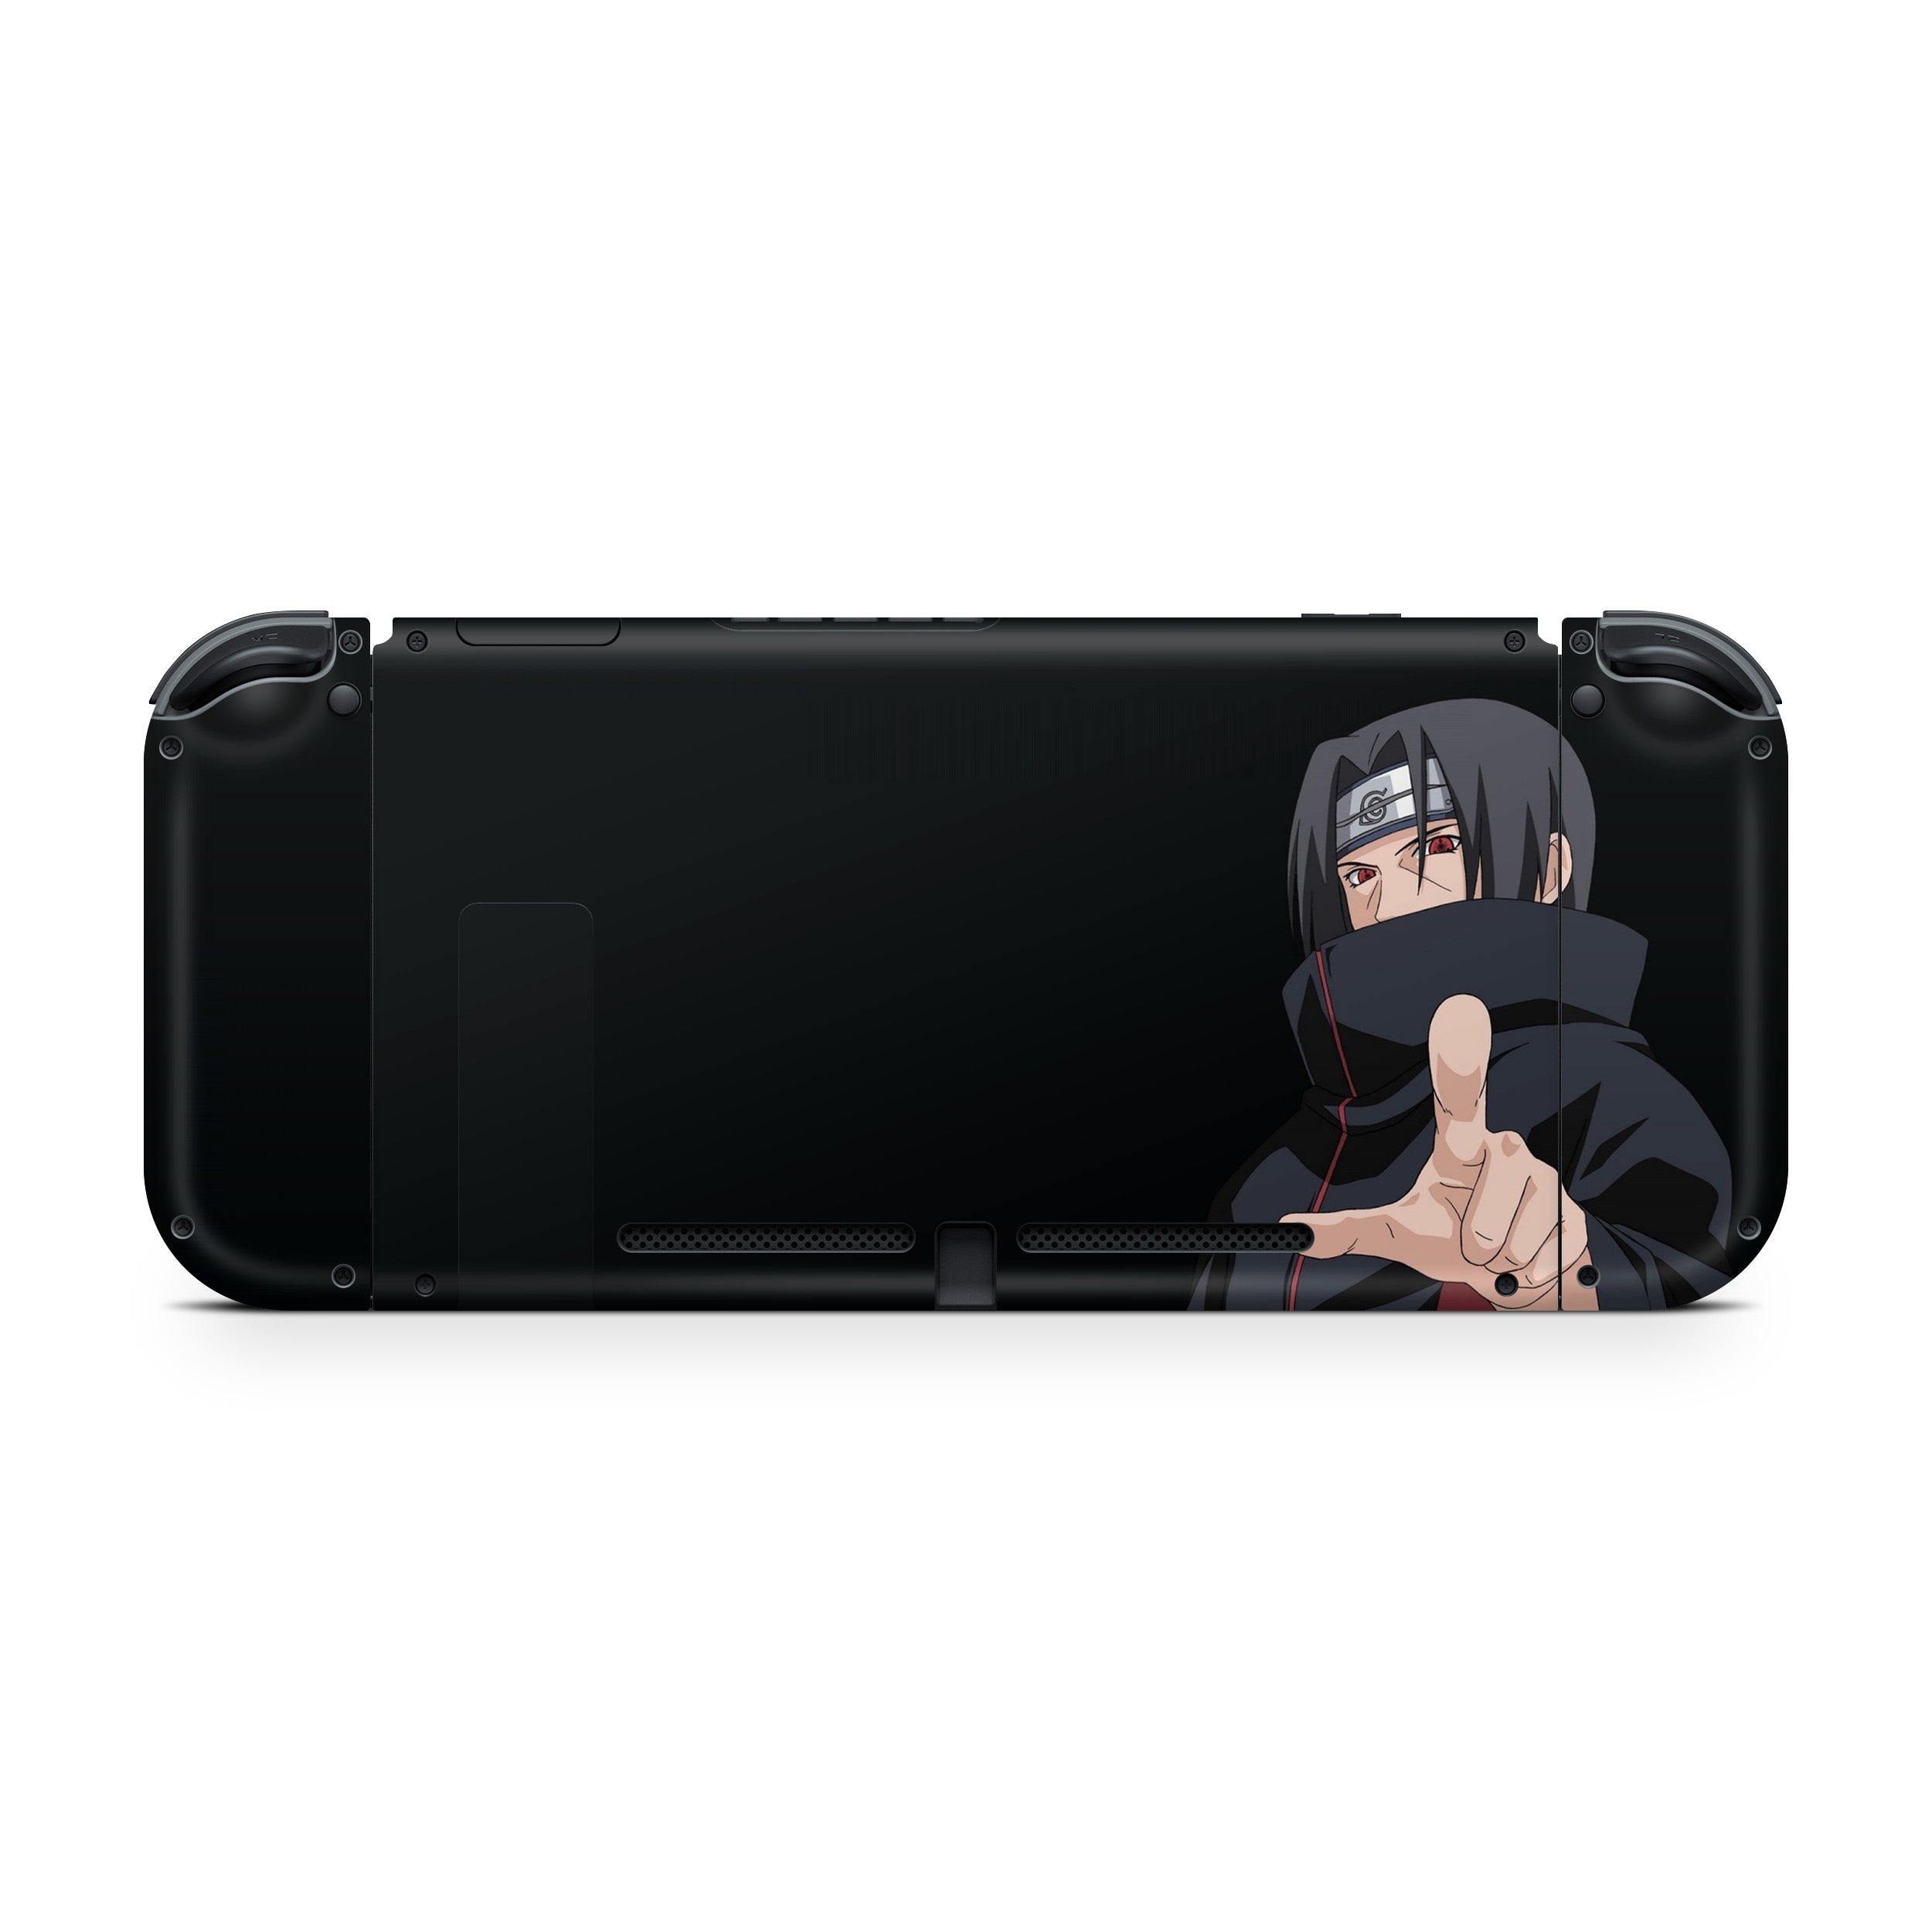 A video game skin featuring a Naruto Itachi design for the Nintendo Switch.